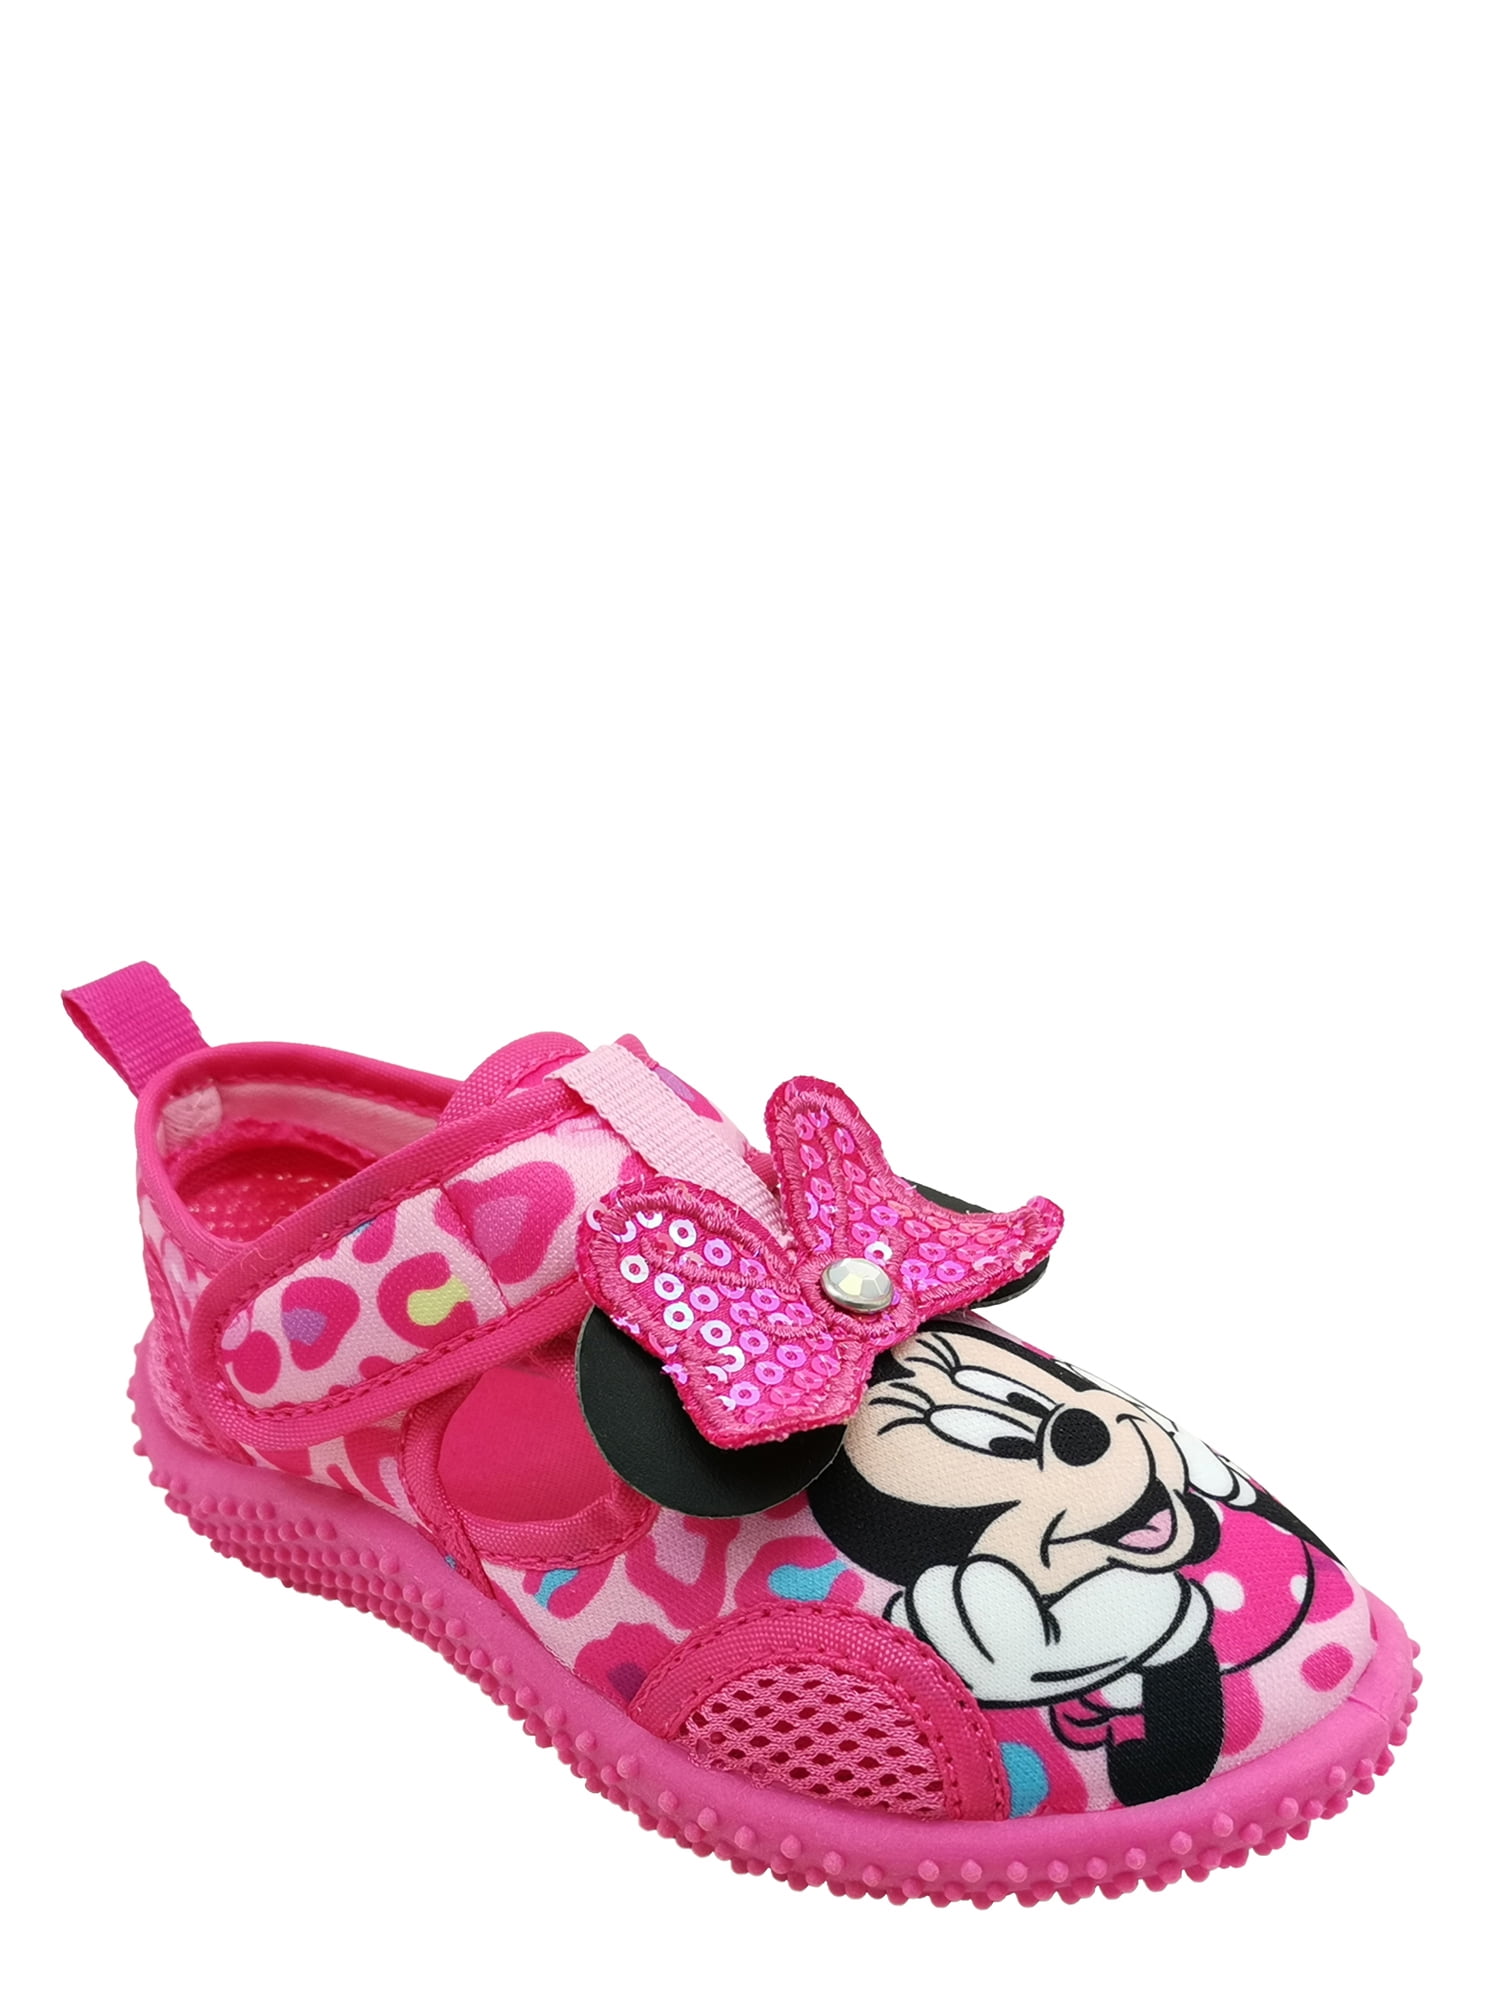 Minnie Mouse Water Shoes Little Girls Size 7-8 Beach Slip on Pink NEW 